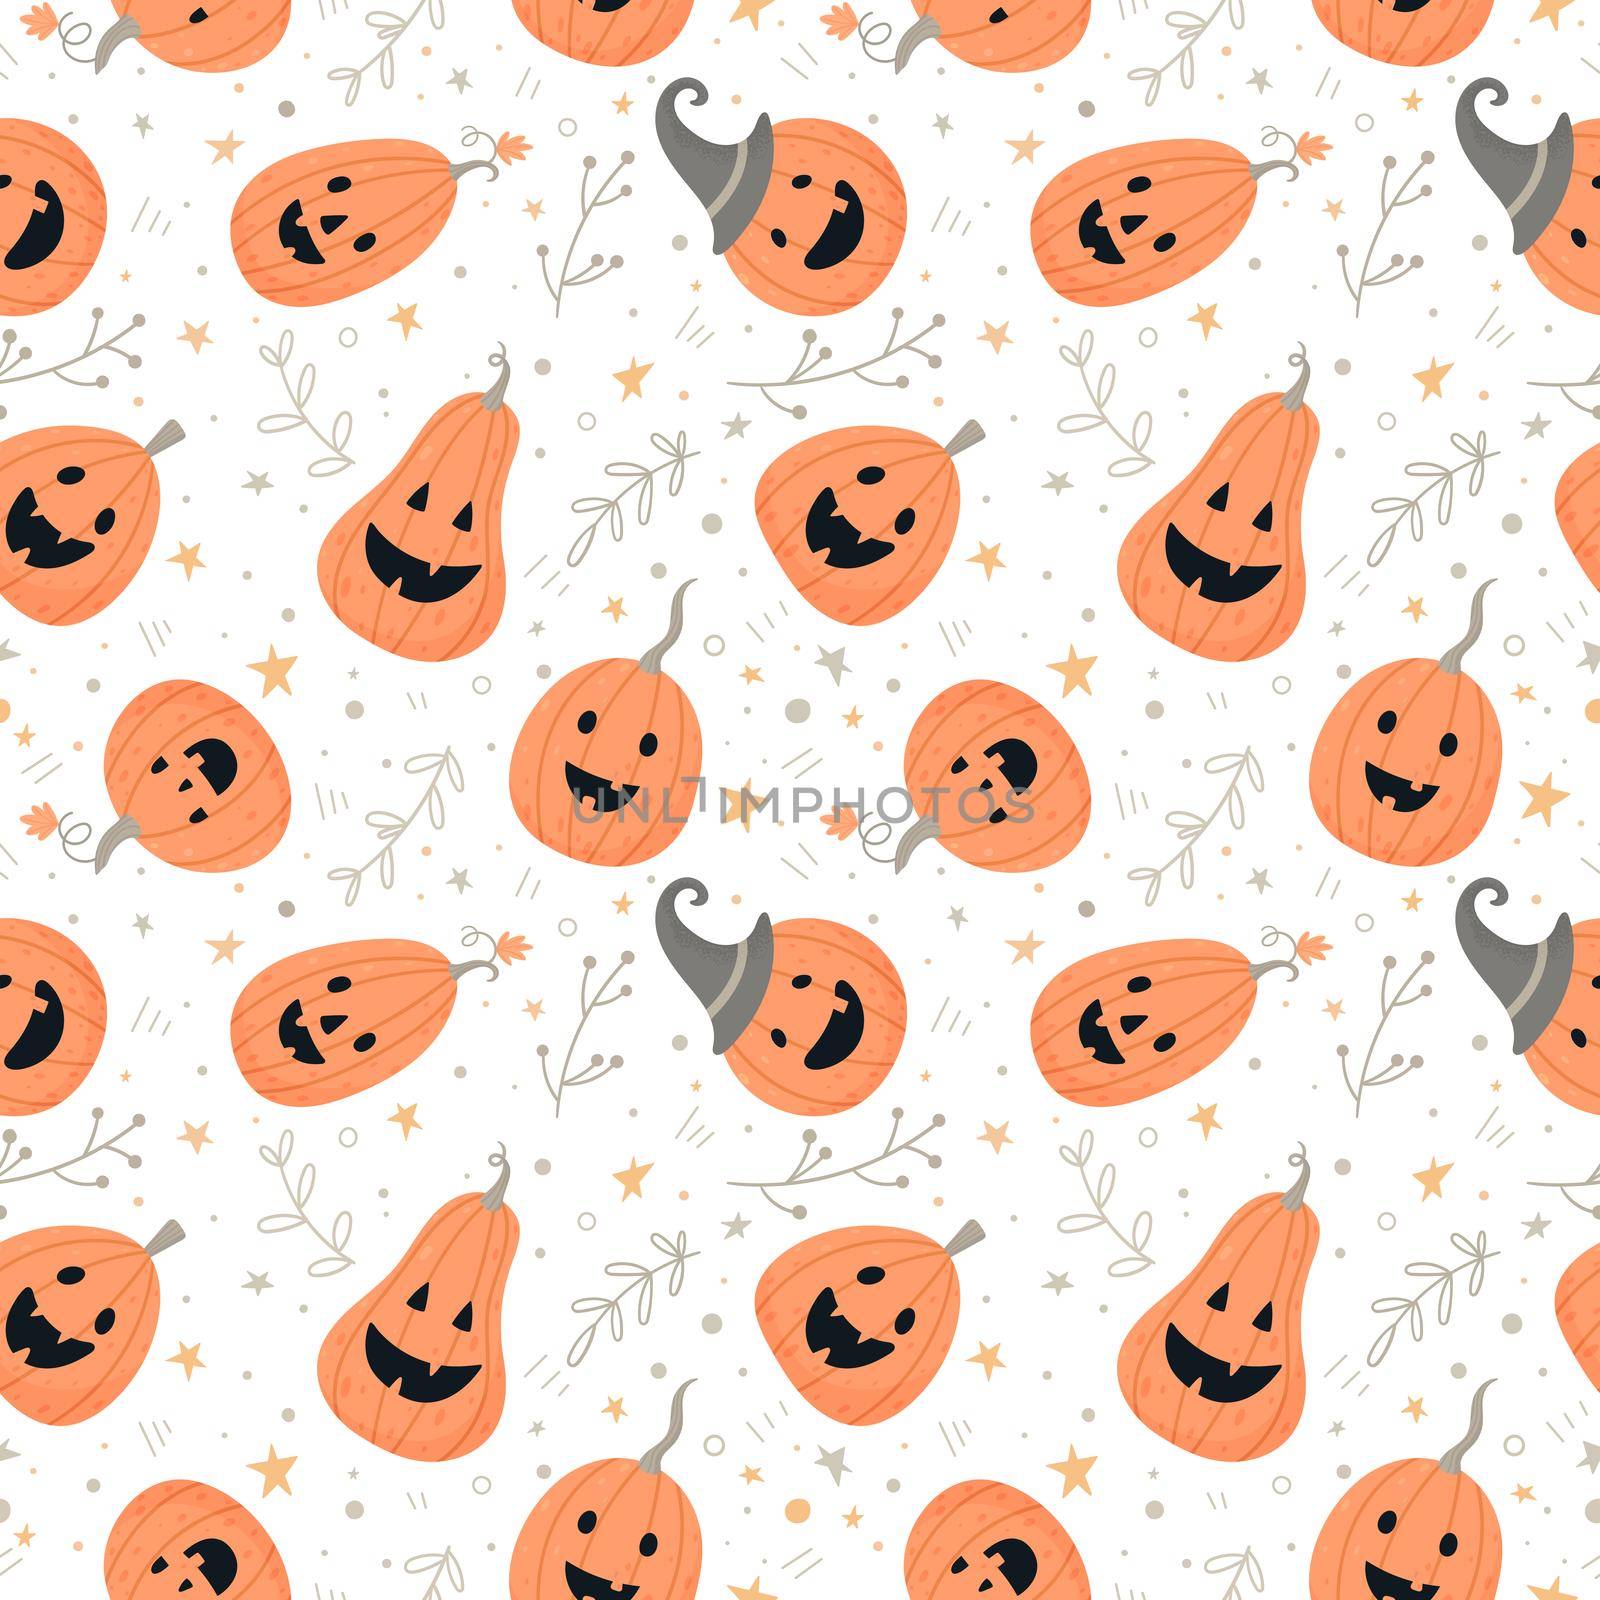 Cute kids design in simple cartoon style for textiles, wrapping paper, etc.